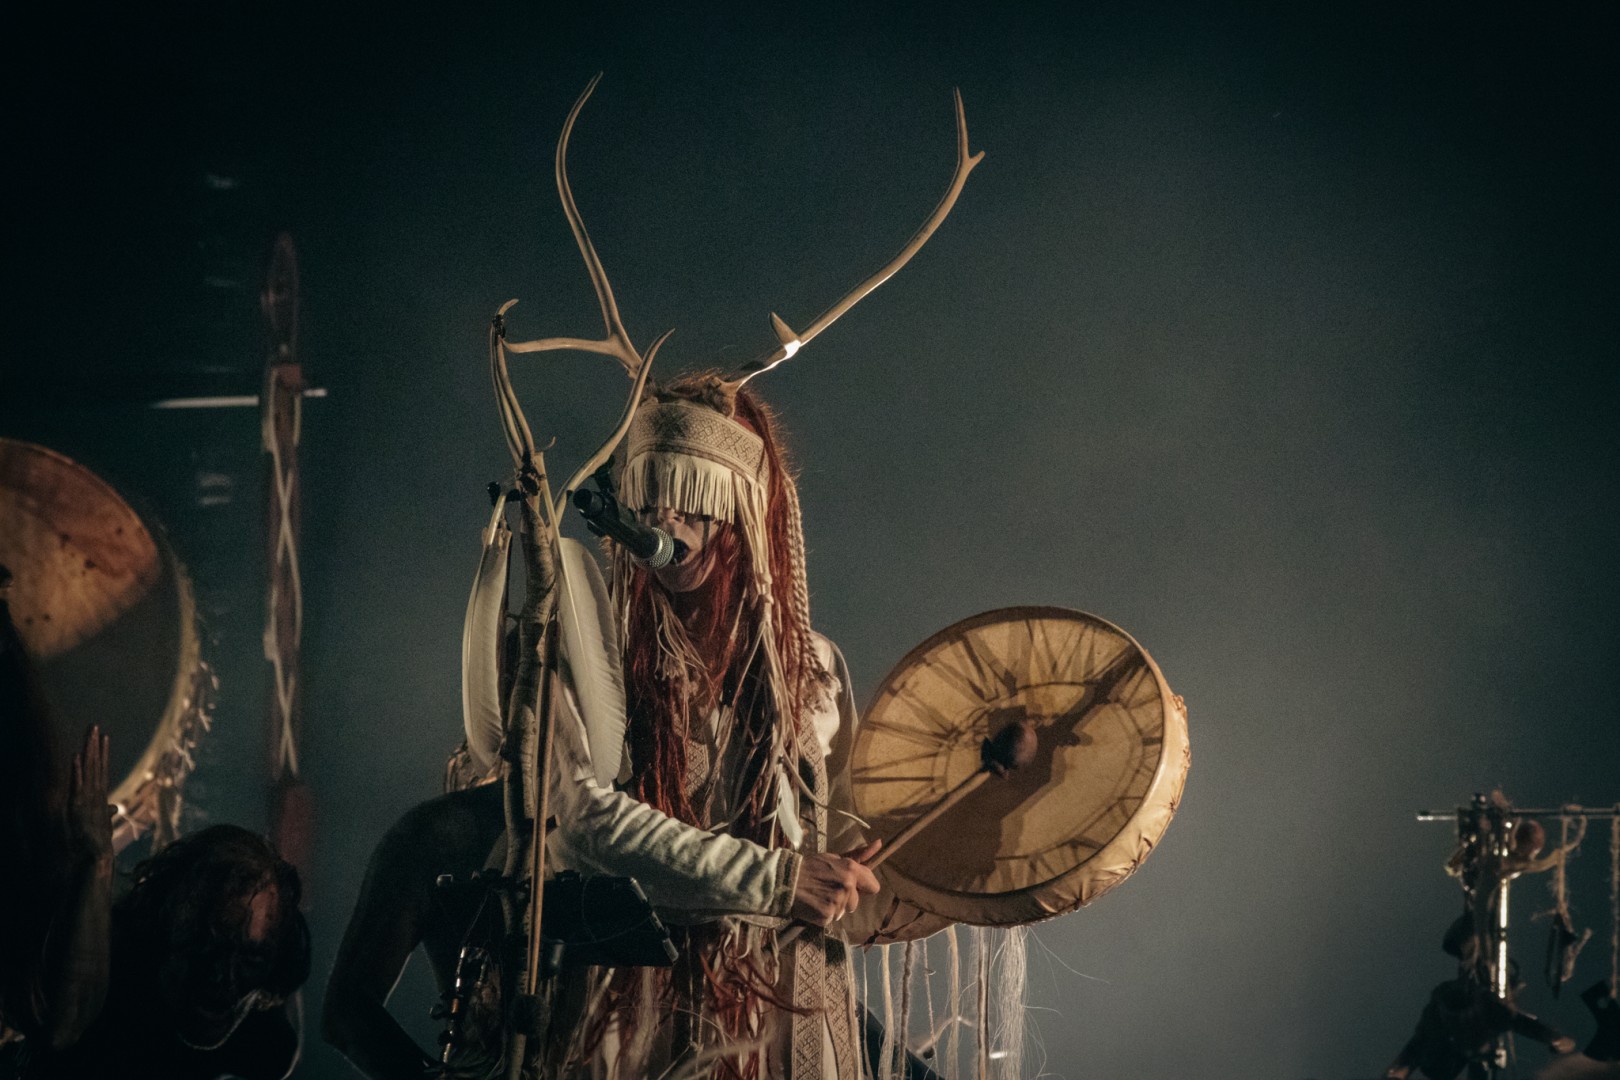 Heilung at Pannonia Fields in Nickelsdorf on June 10, 2022 (0543366f8f)